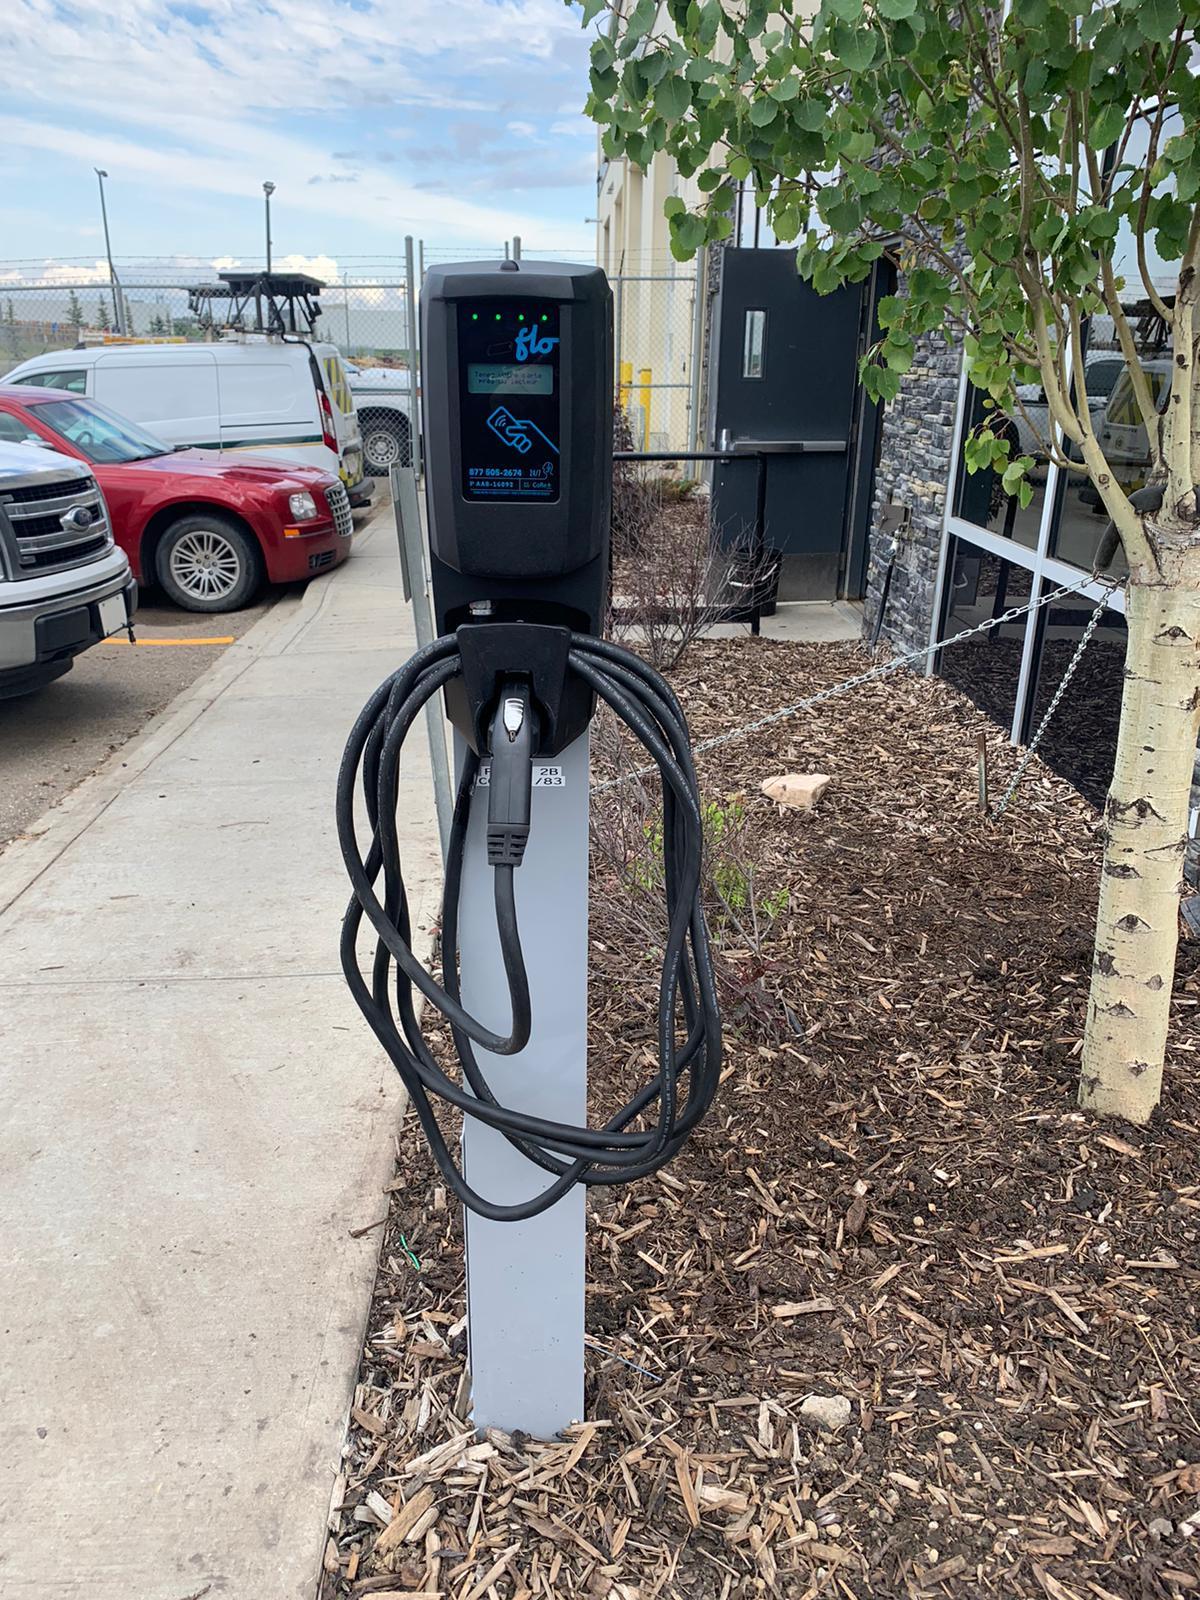 flo-ev-charger-installation-project-flo-core-level-2-bldg-electric